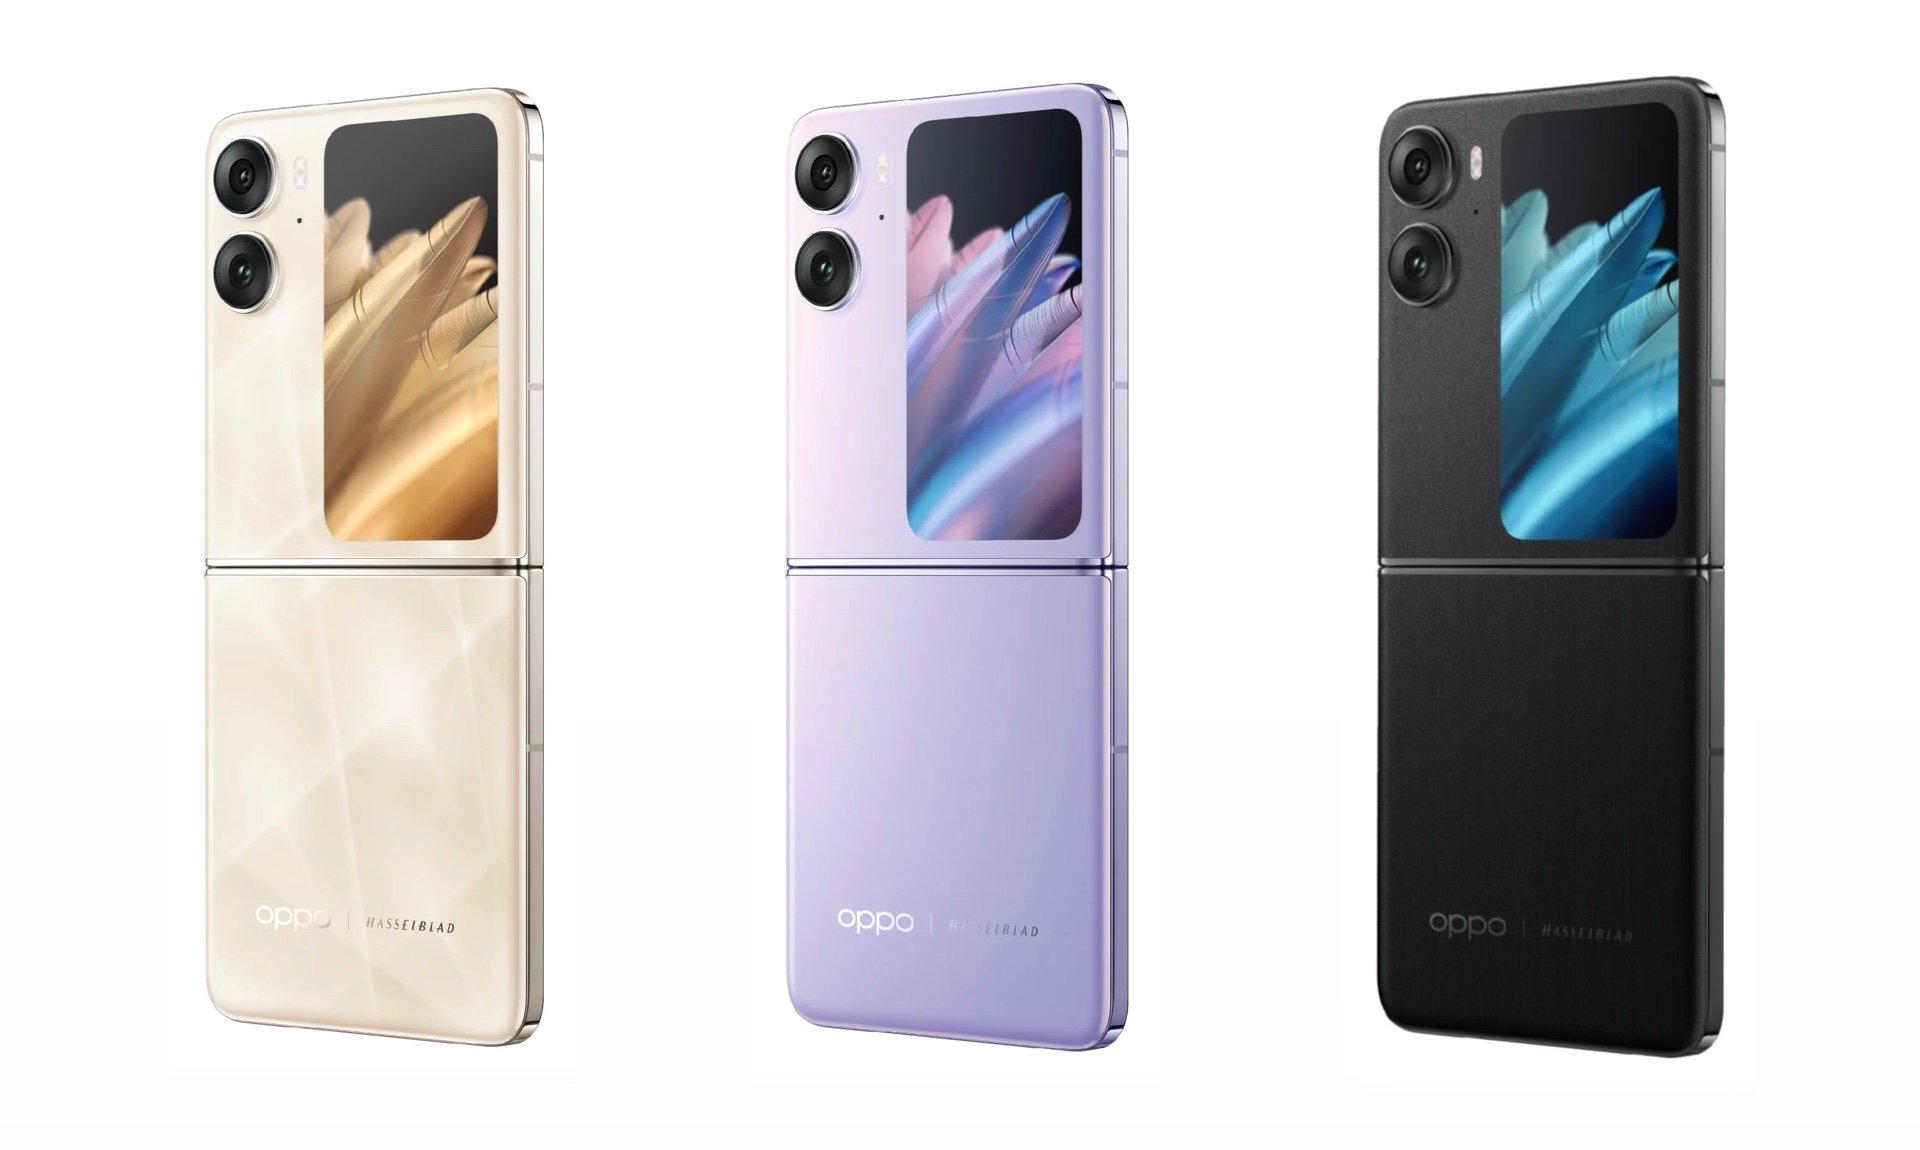 The available colors for the Oppo Find N2 Flip